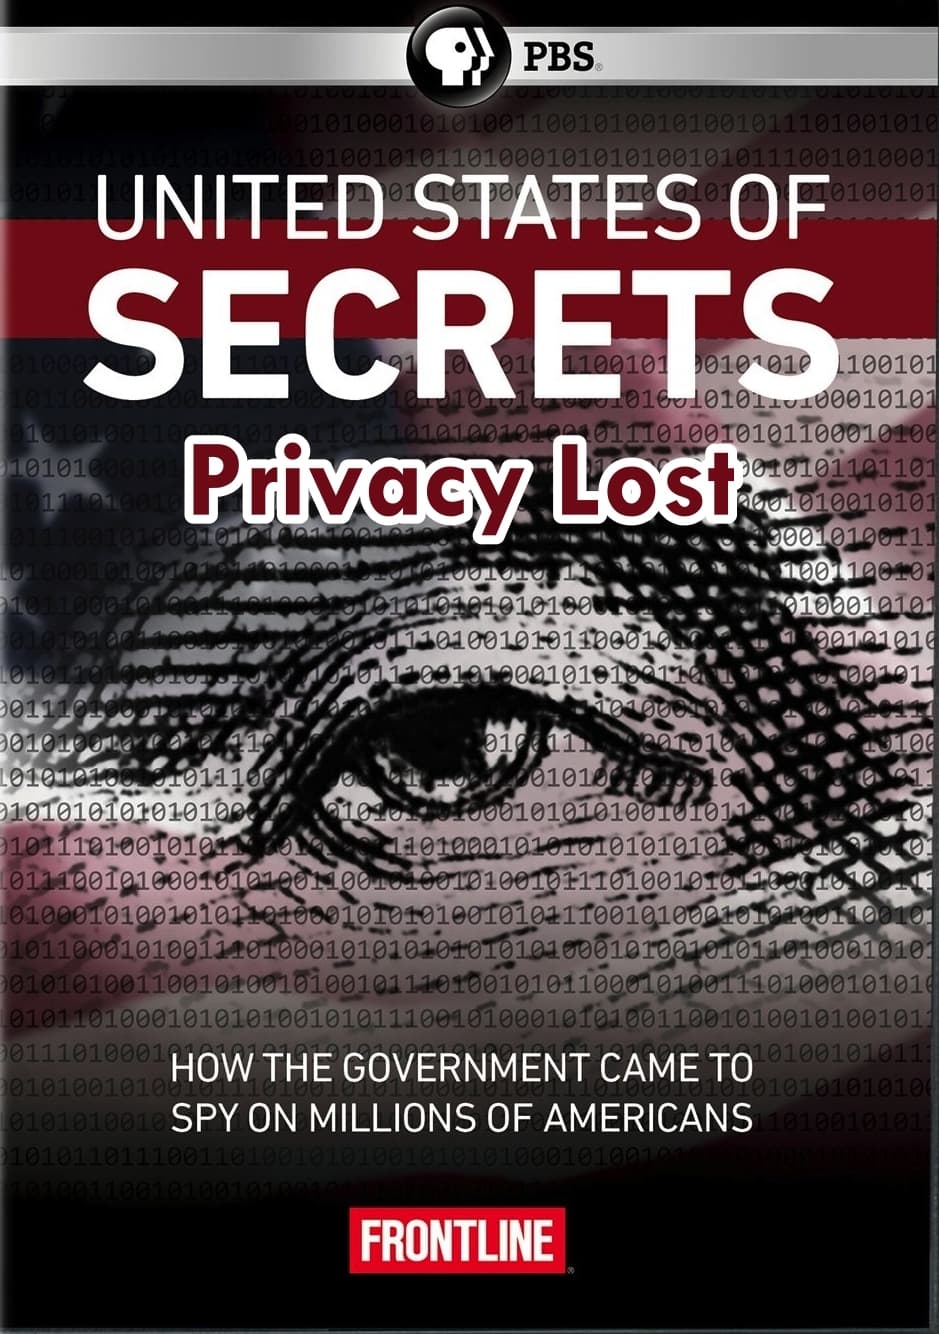 United States of Secrets (Part Two): Privacy Lost